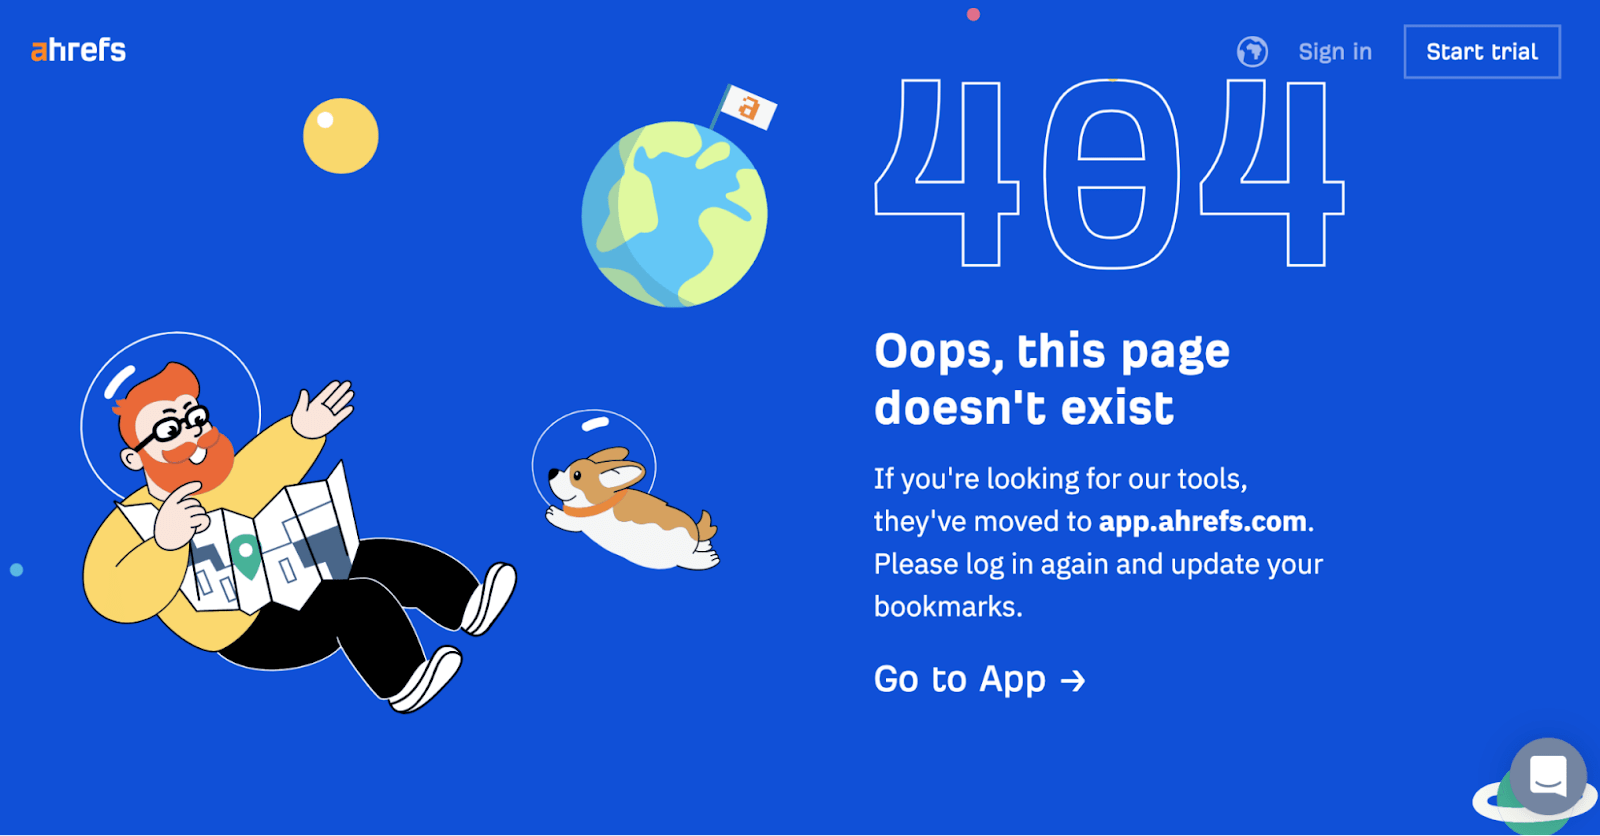 Ahrefs' 404 page